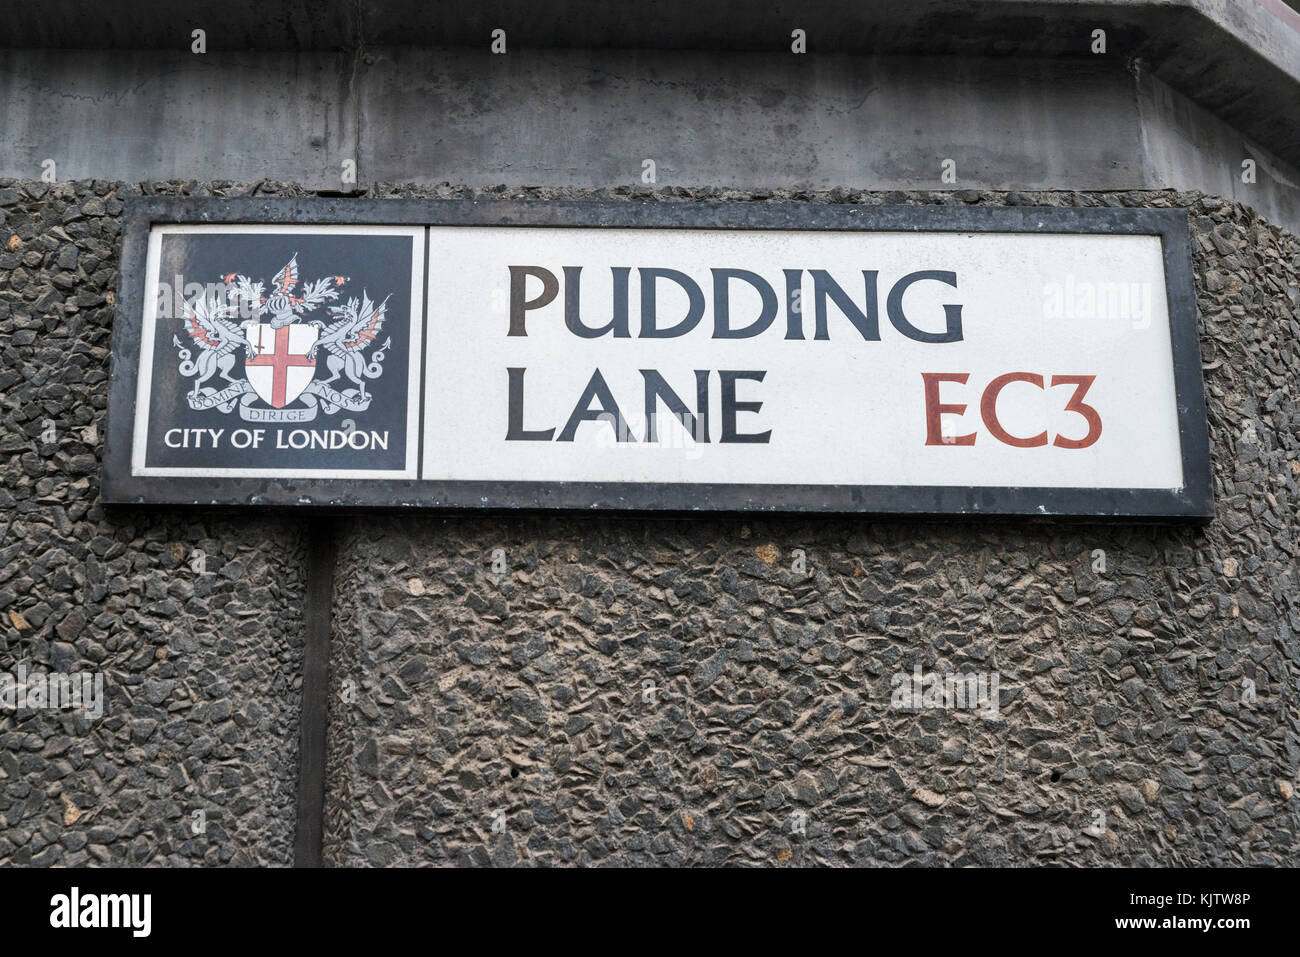 Pudding Lane in the City of London, location of where the Great Fire of